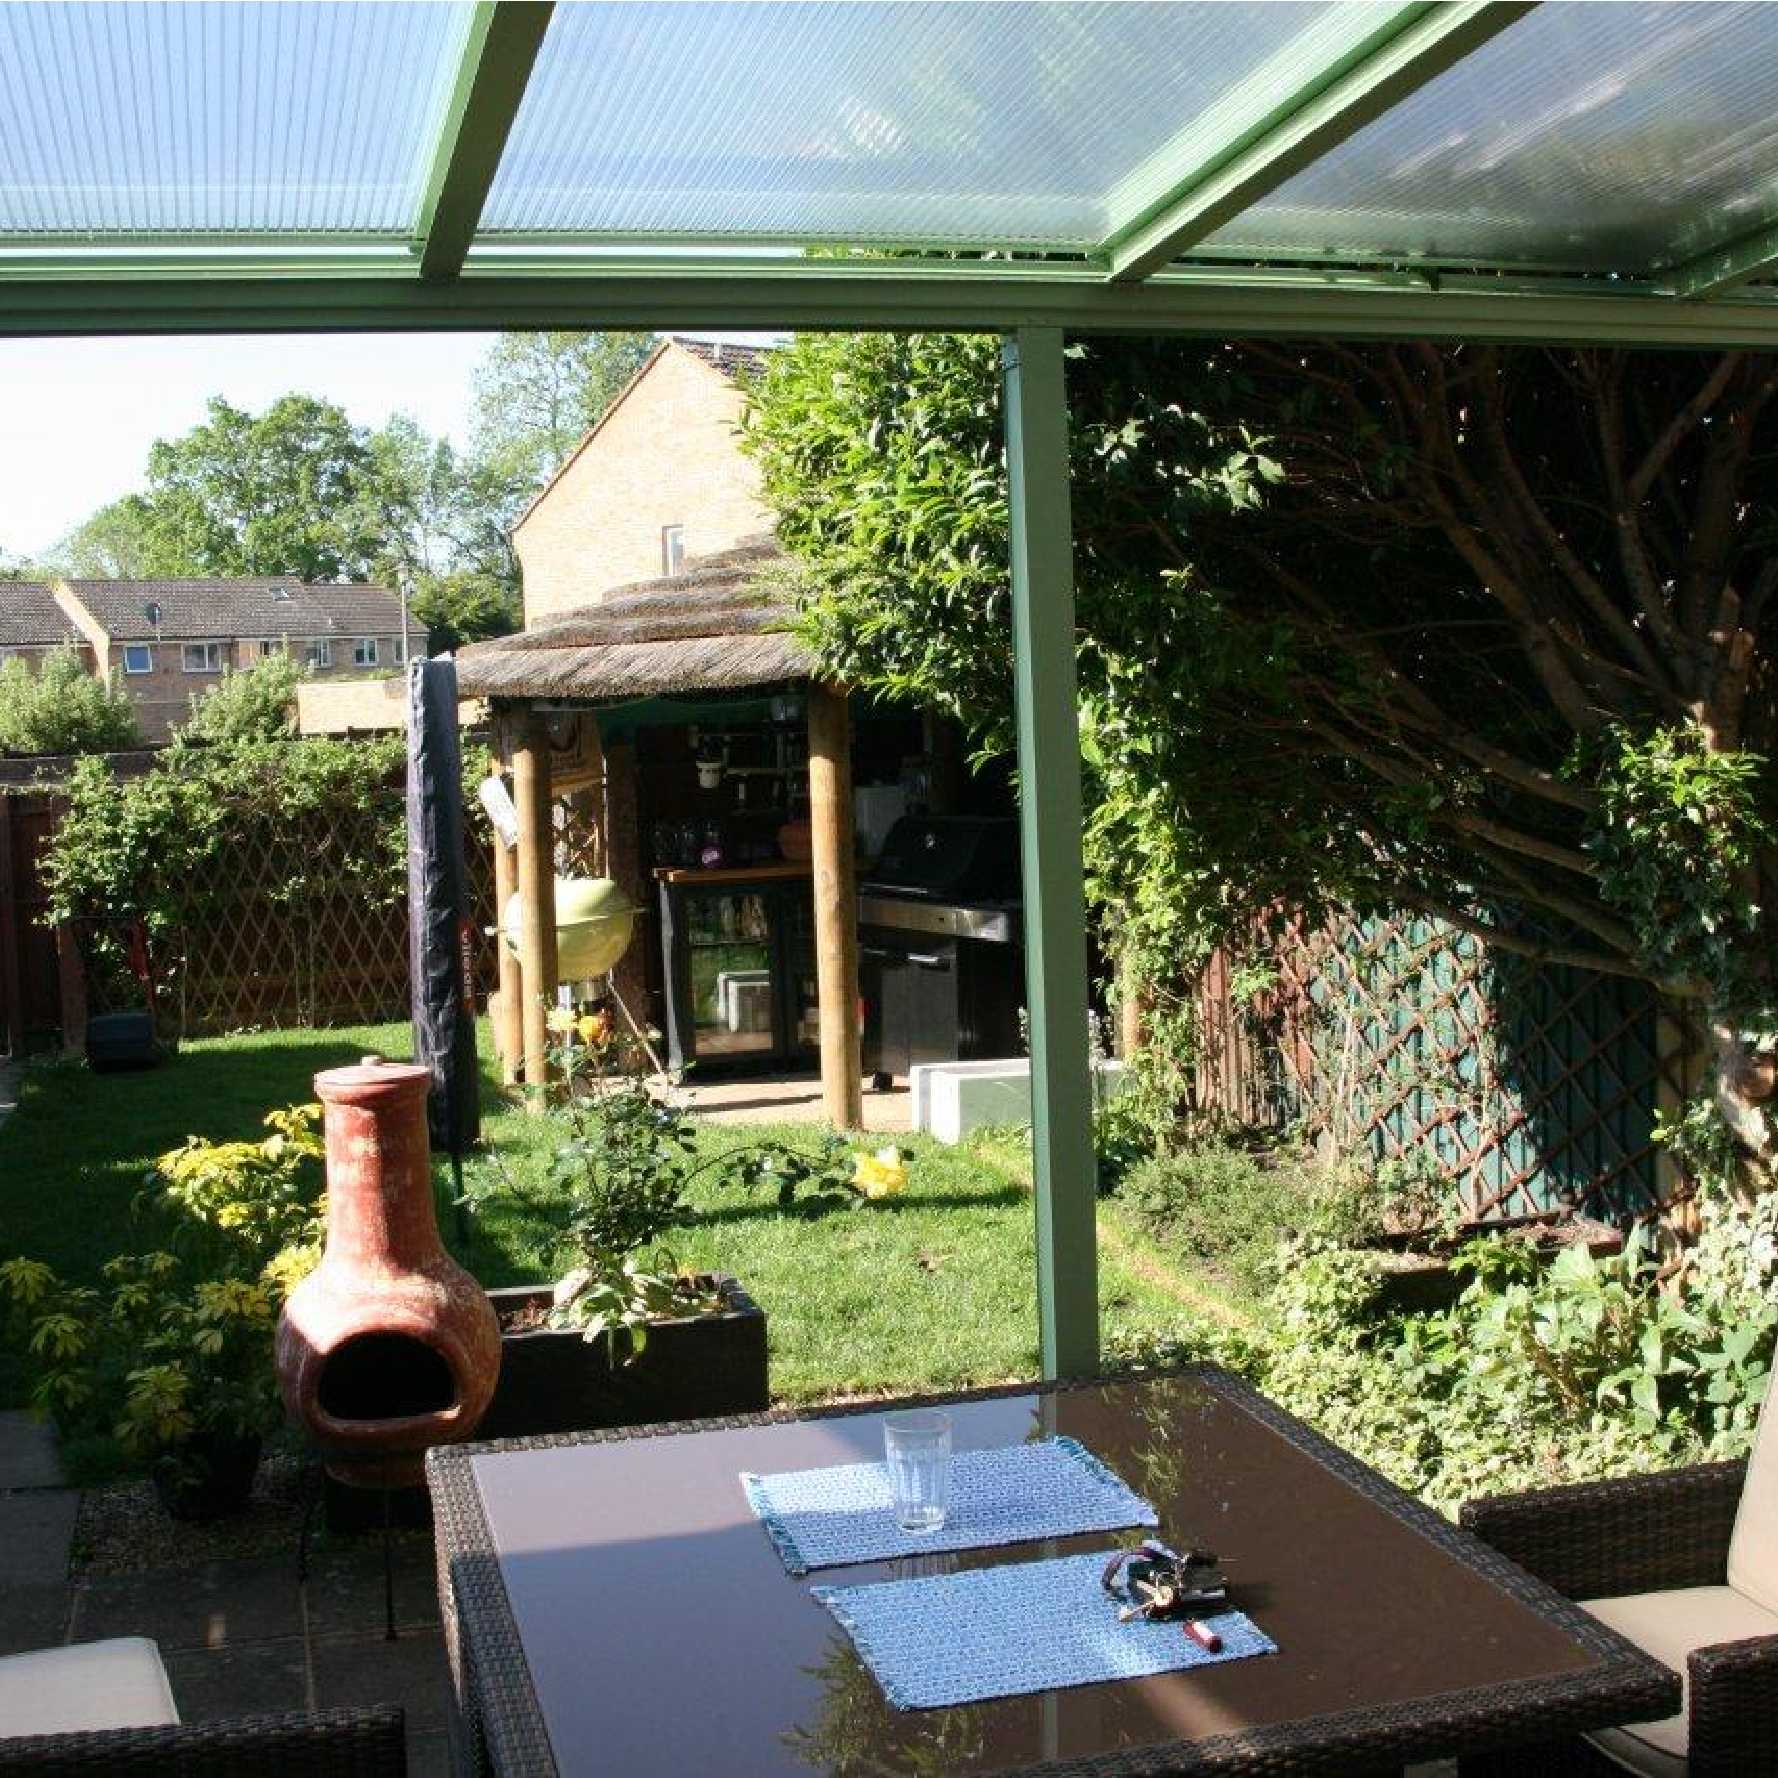 Affordable Omega Smart Lean-To Canopy, White with 16mm Polycarbonate Glazing - 2.1m (W) x 3.5m (P), (2) Supporting Posts